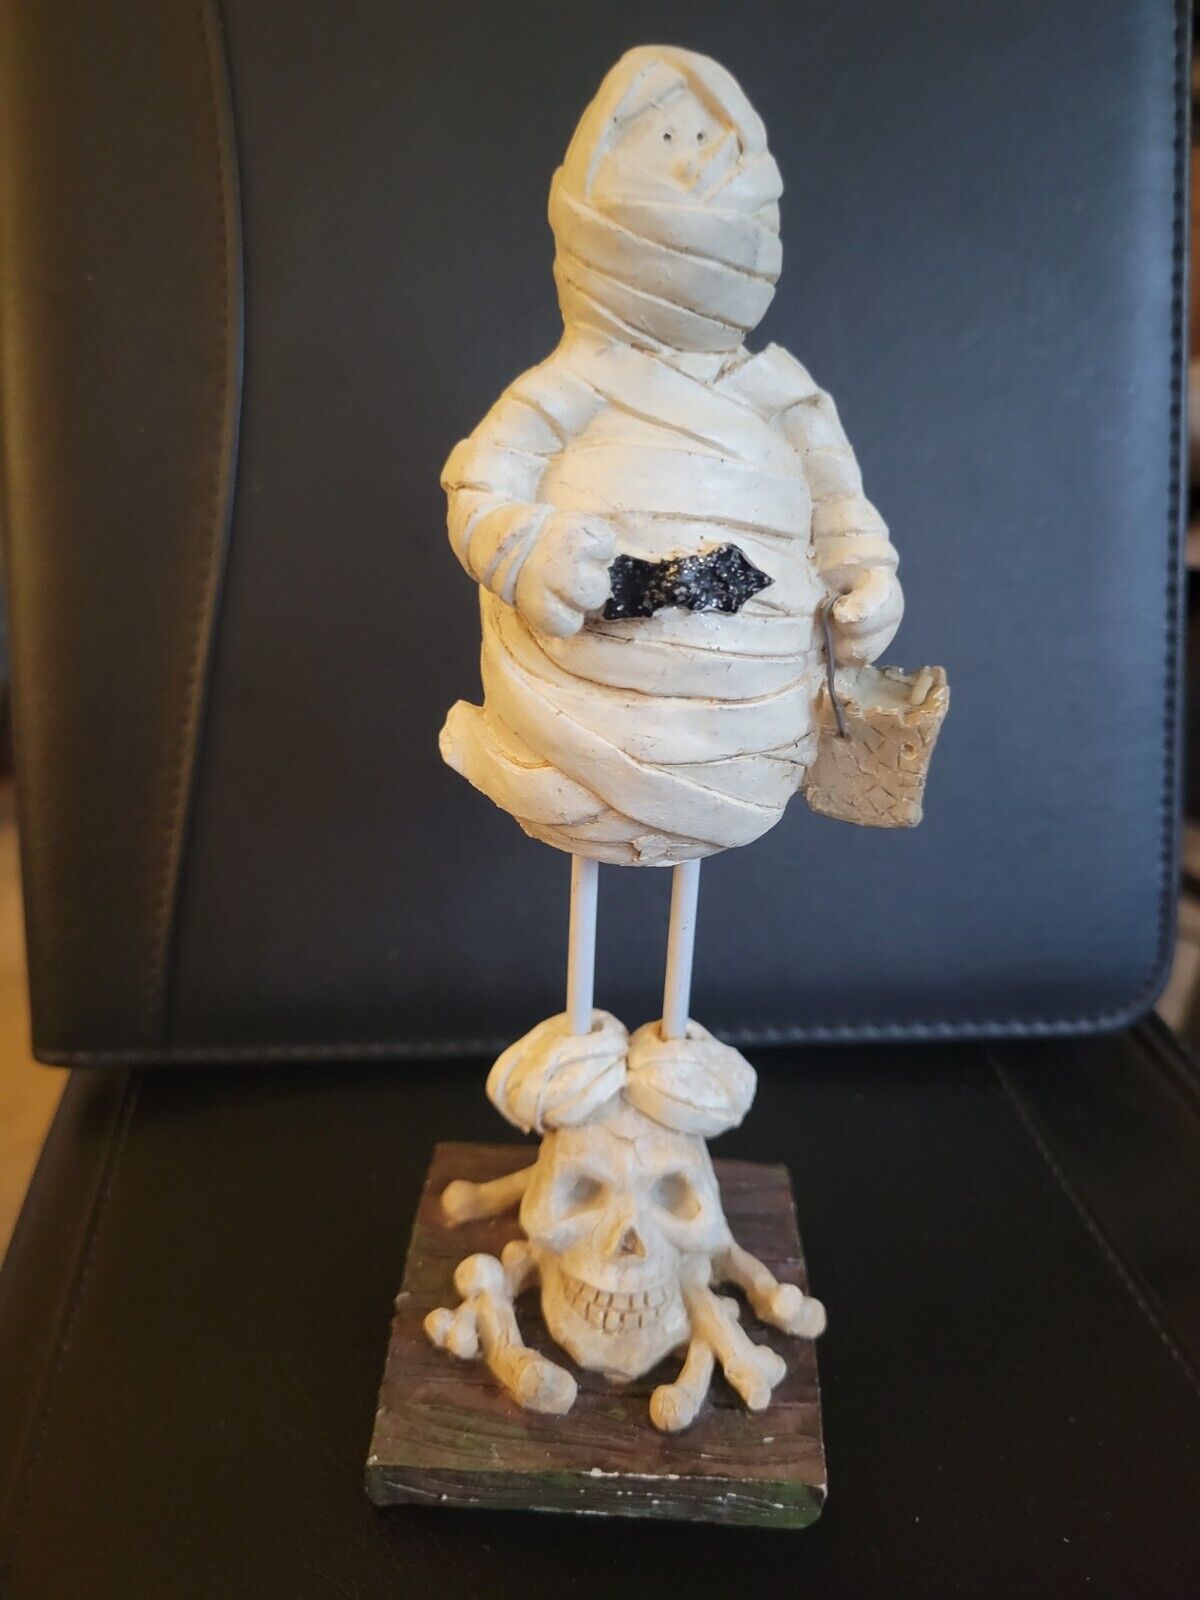 2003 JTS Mummy Figurine w/Skull 7 inches tall Rare and Very Cool